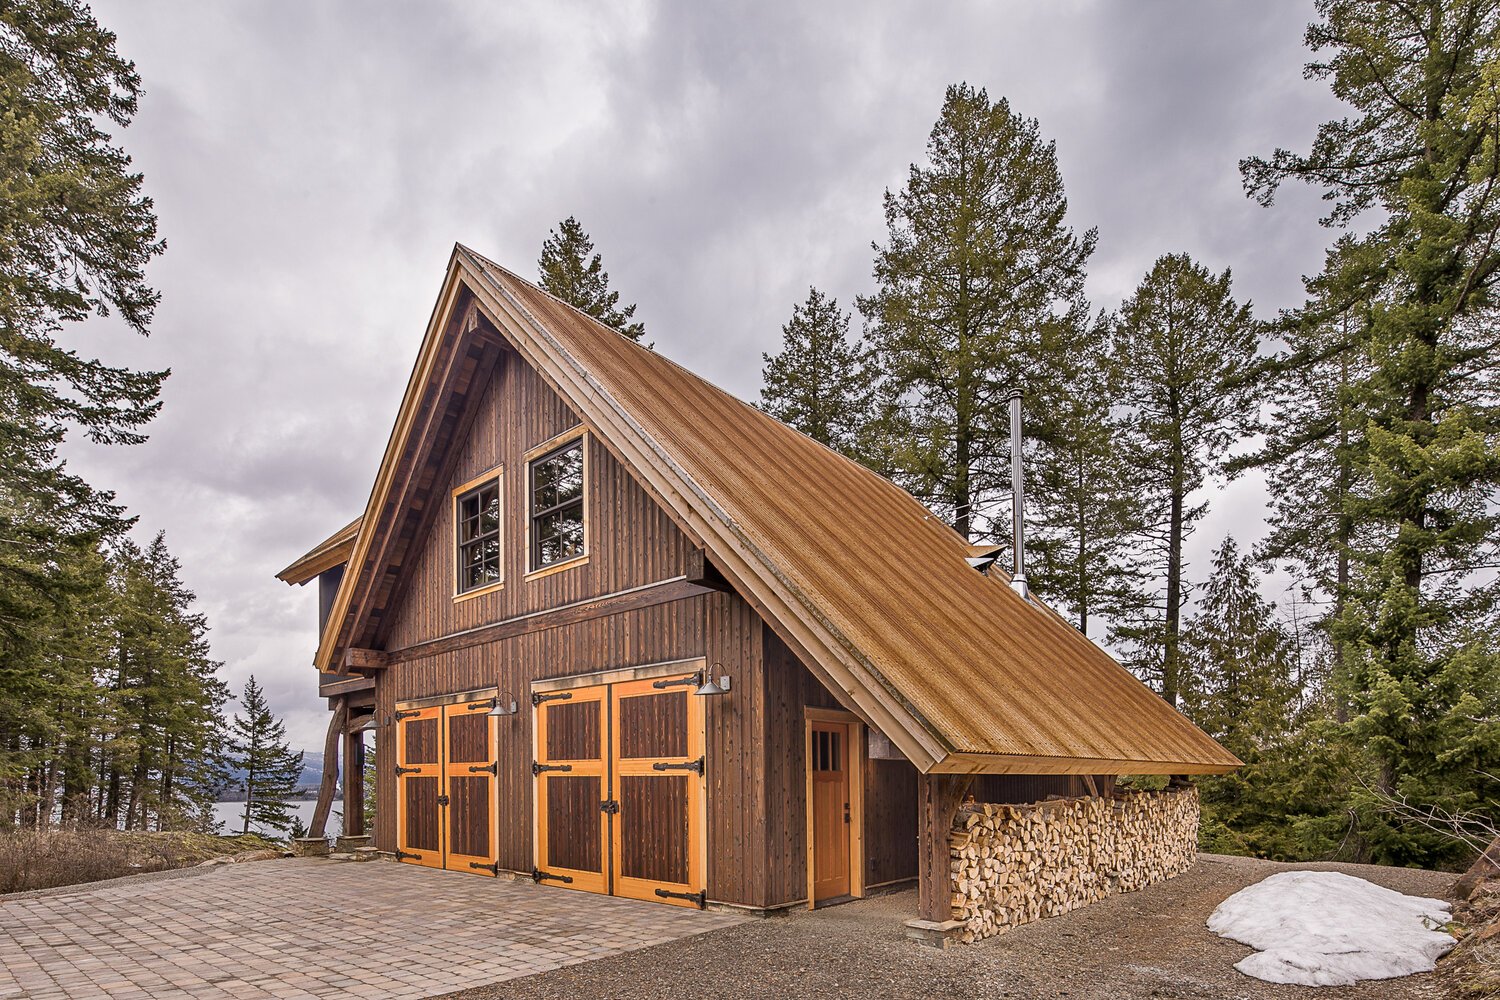 contest-point-collin-beggs-timber-framing-design-build-2-LoRes.jpg